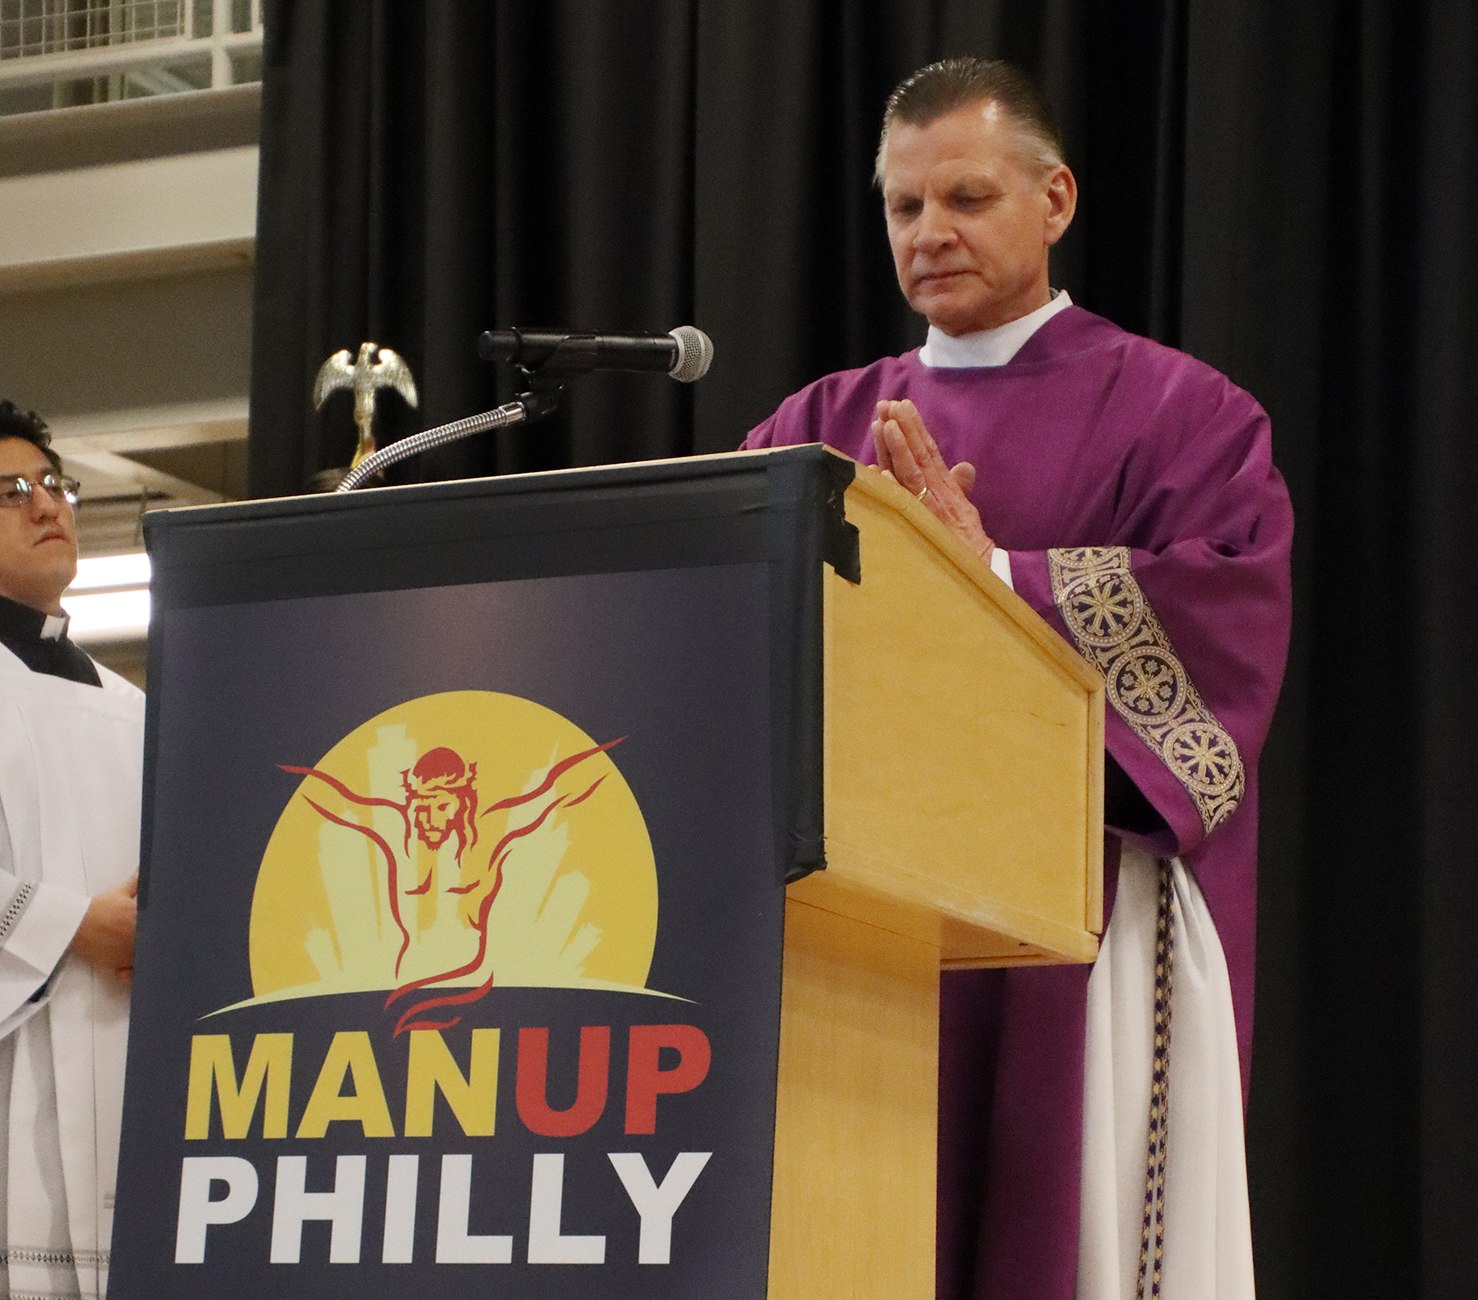 1,500 men show up for Man Up Philly Catholic Philly